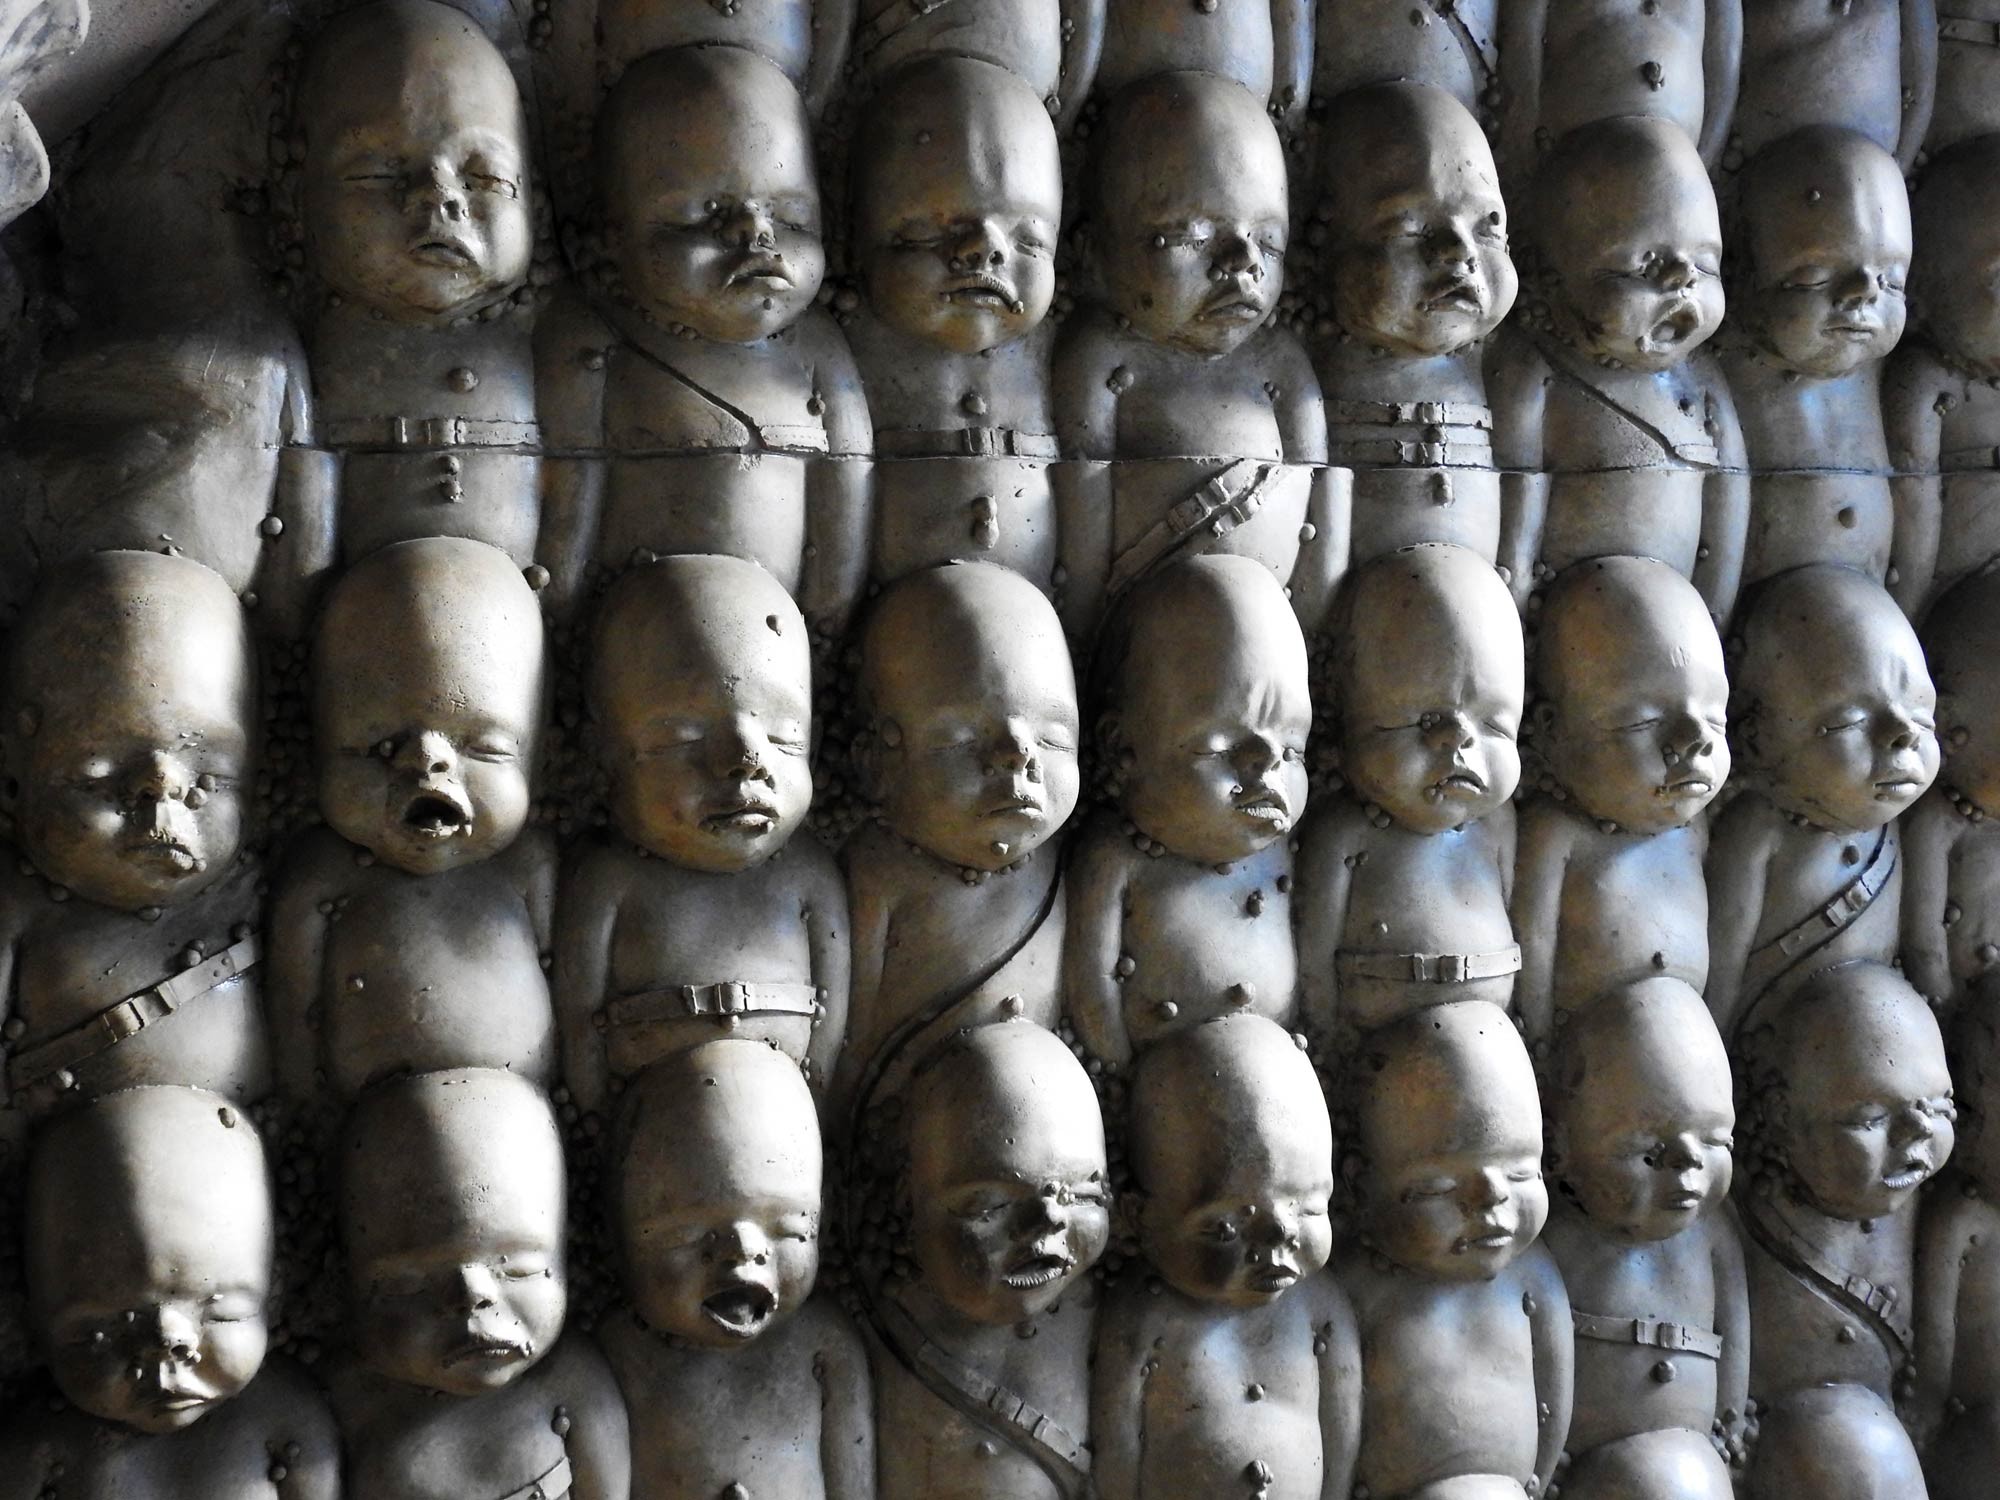 Photo of the bar wall designed by HR Giger. Looks like dead babies.